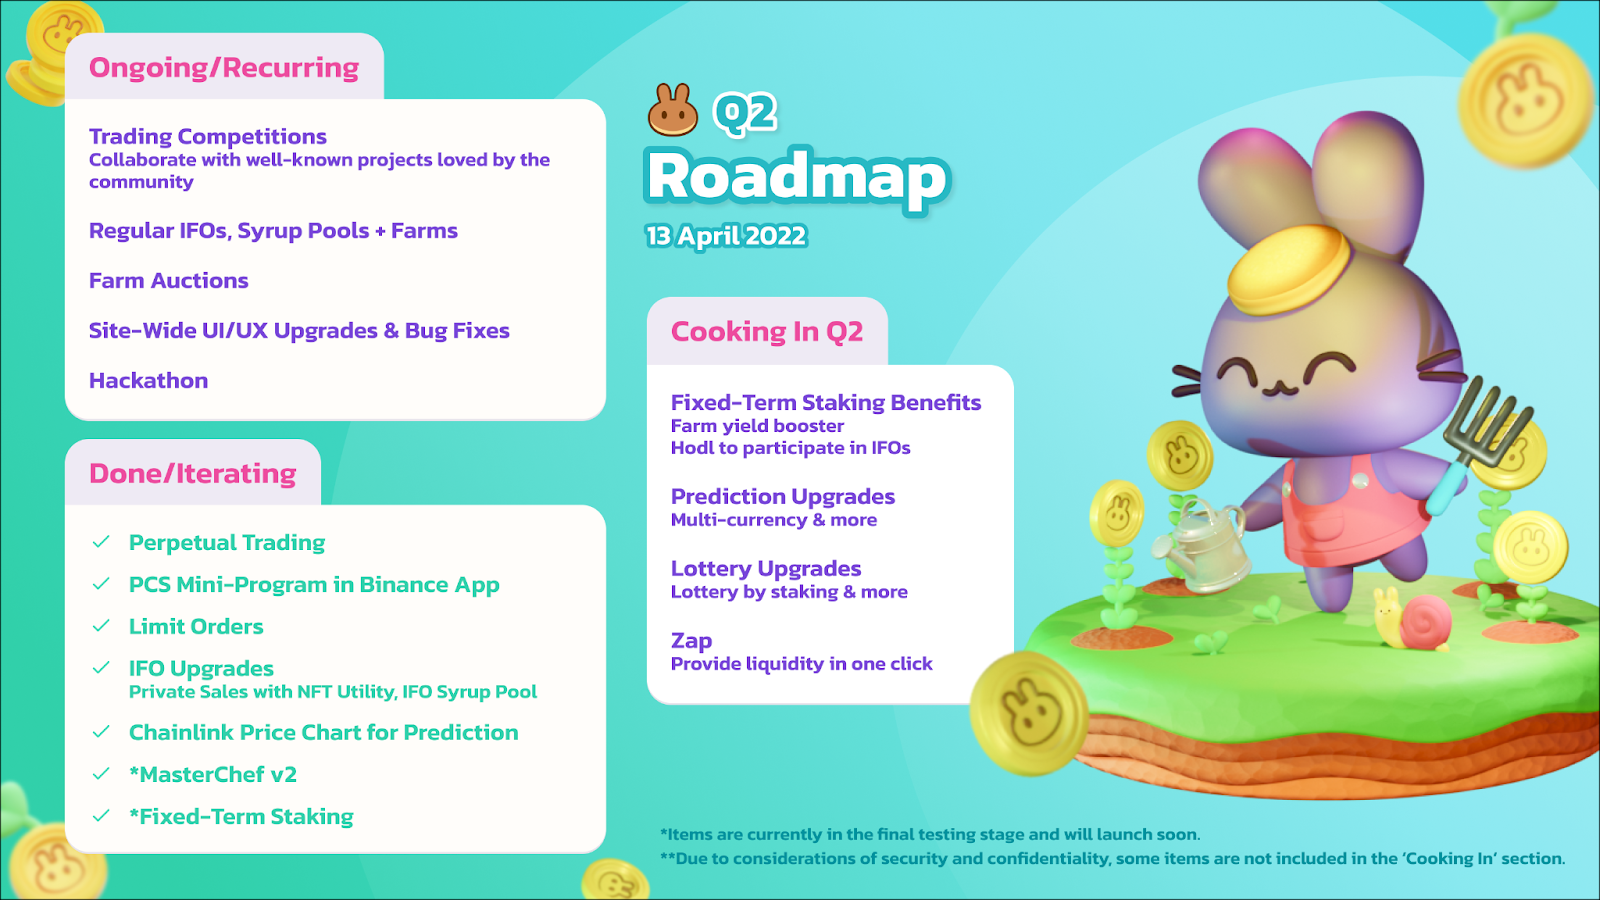 PancakeSwap Roadmap including the event that are ongoing, planning